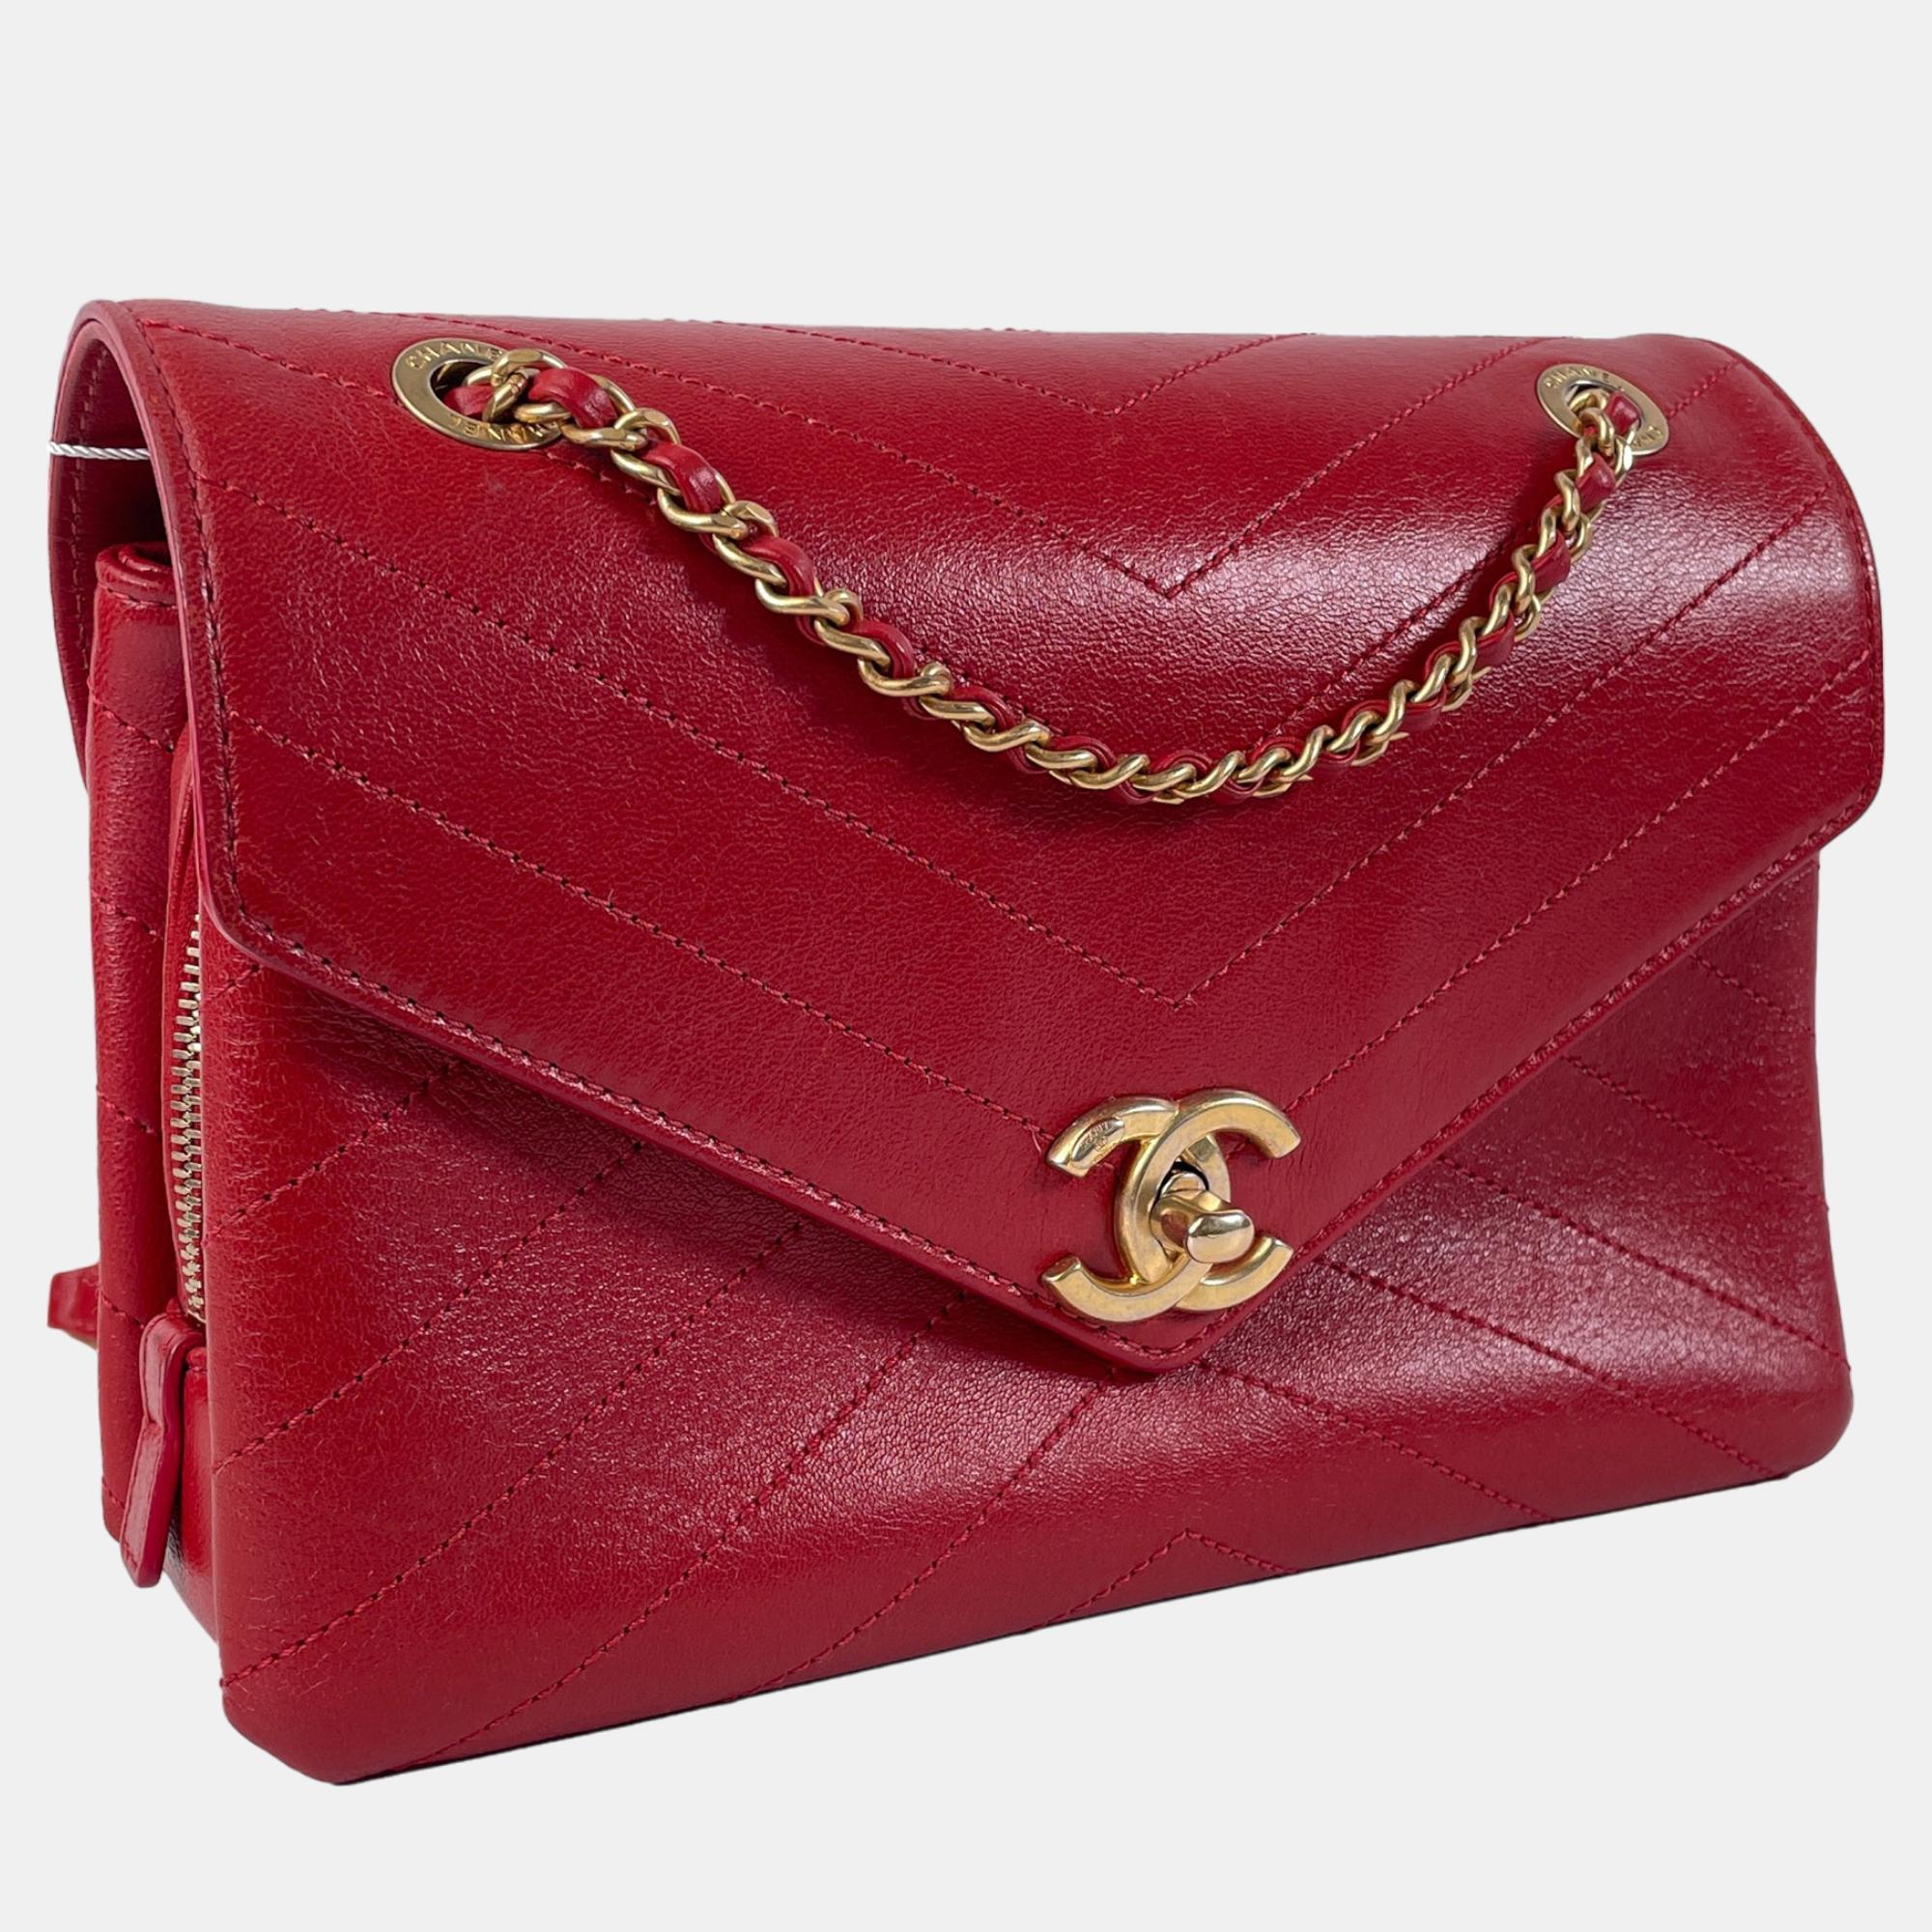 

Chanel Red Small Lambskin Coco Chevron Envelope Flap Bag